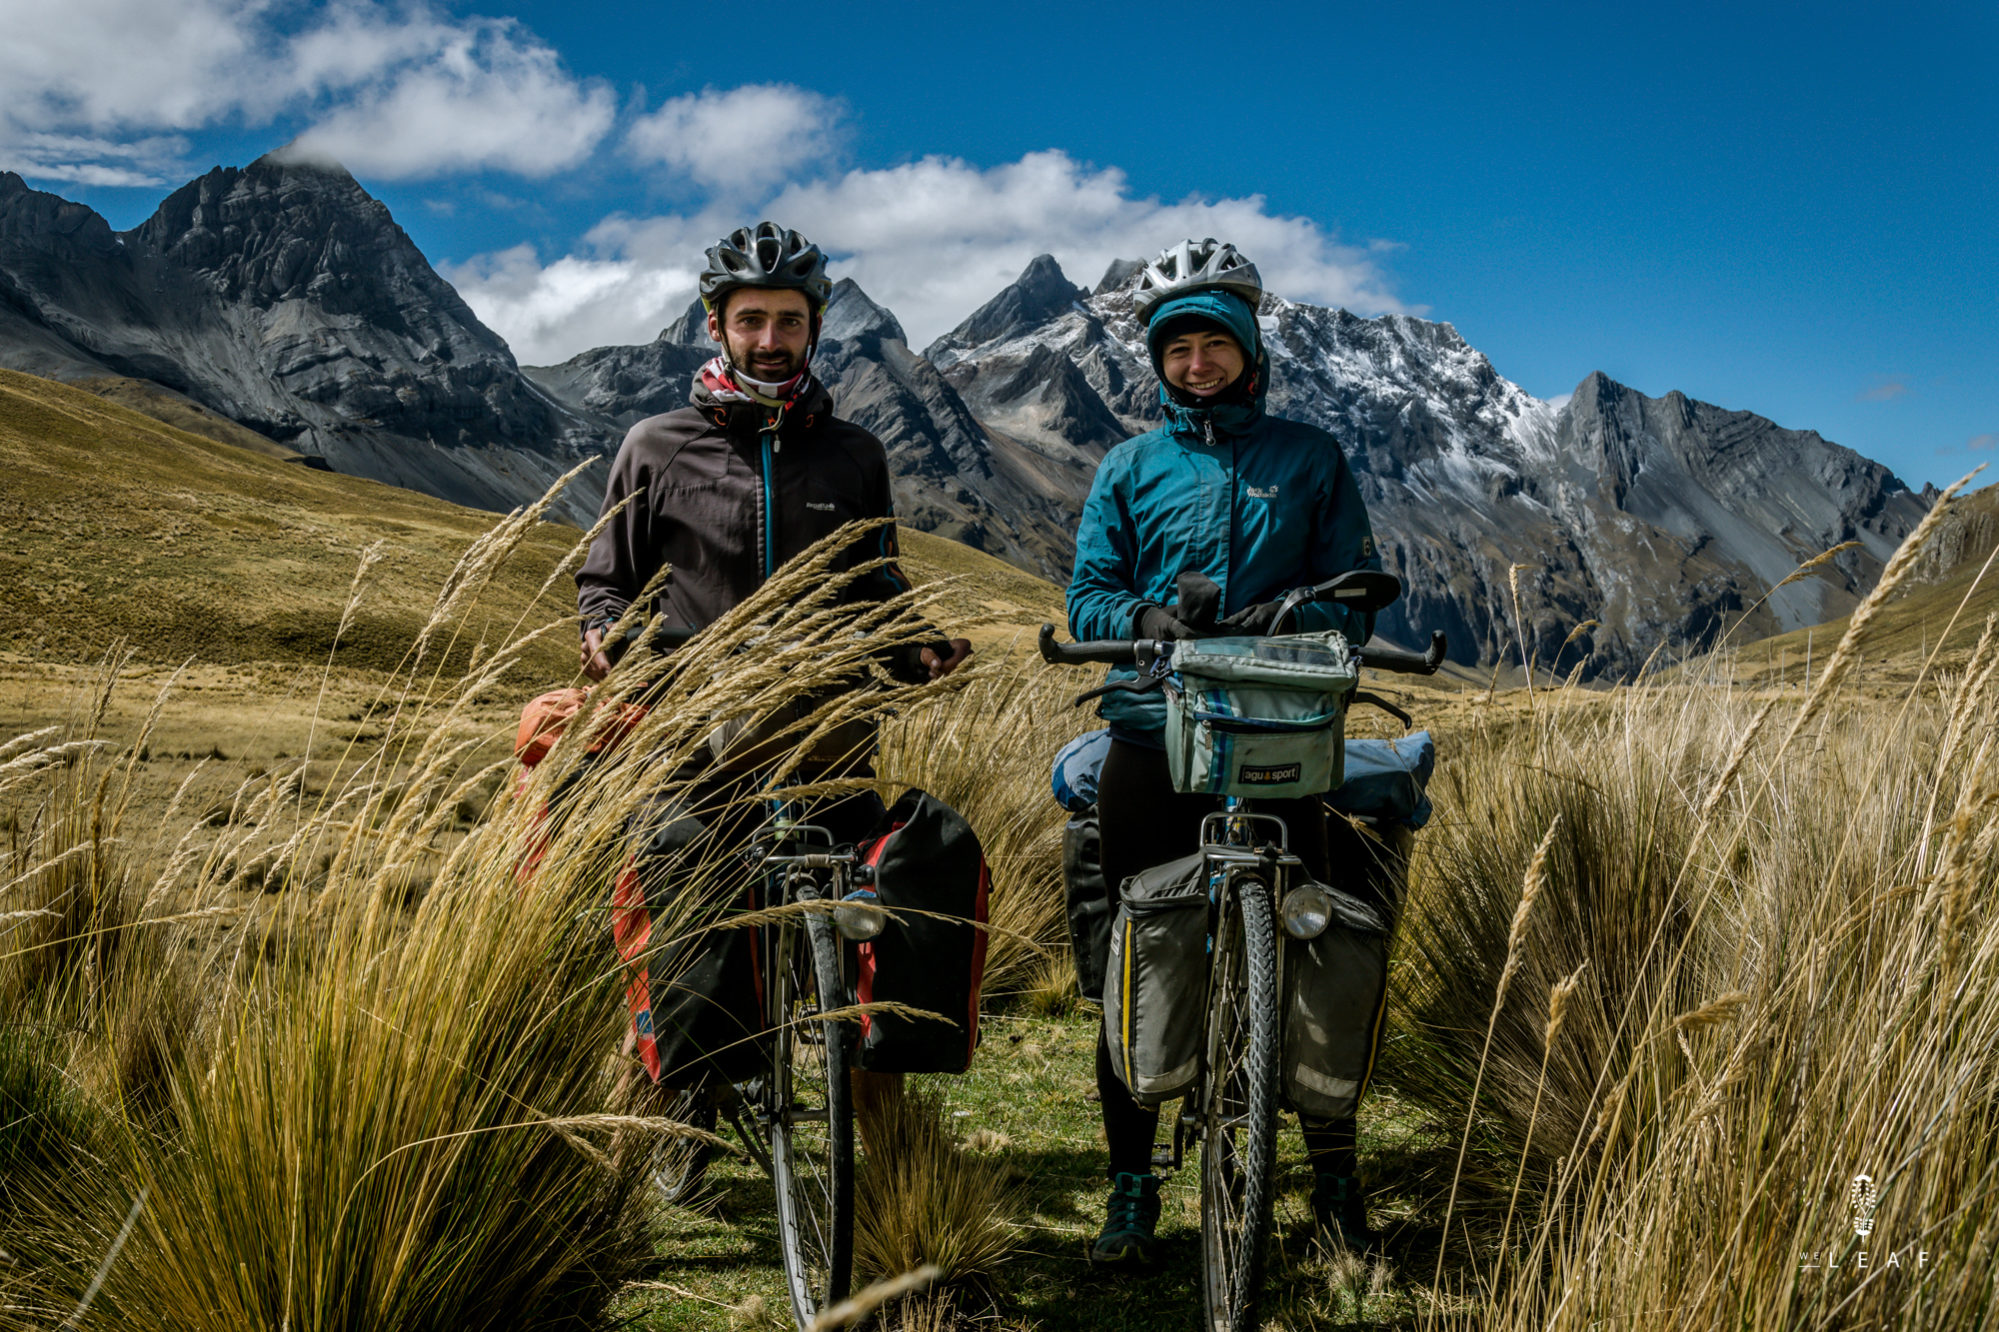 Cycling in South America, south to north, or the other way around?